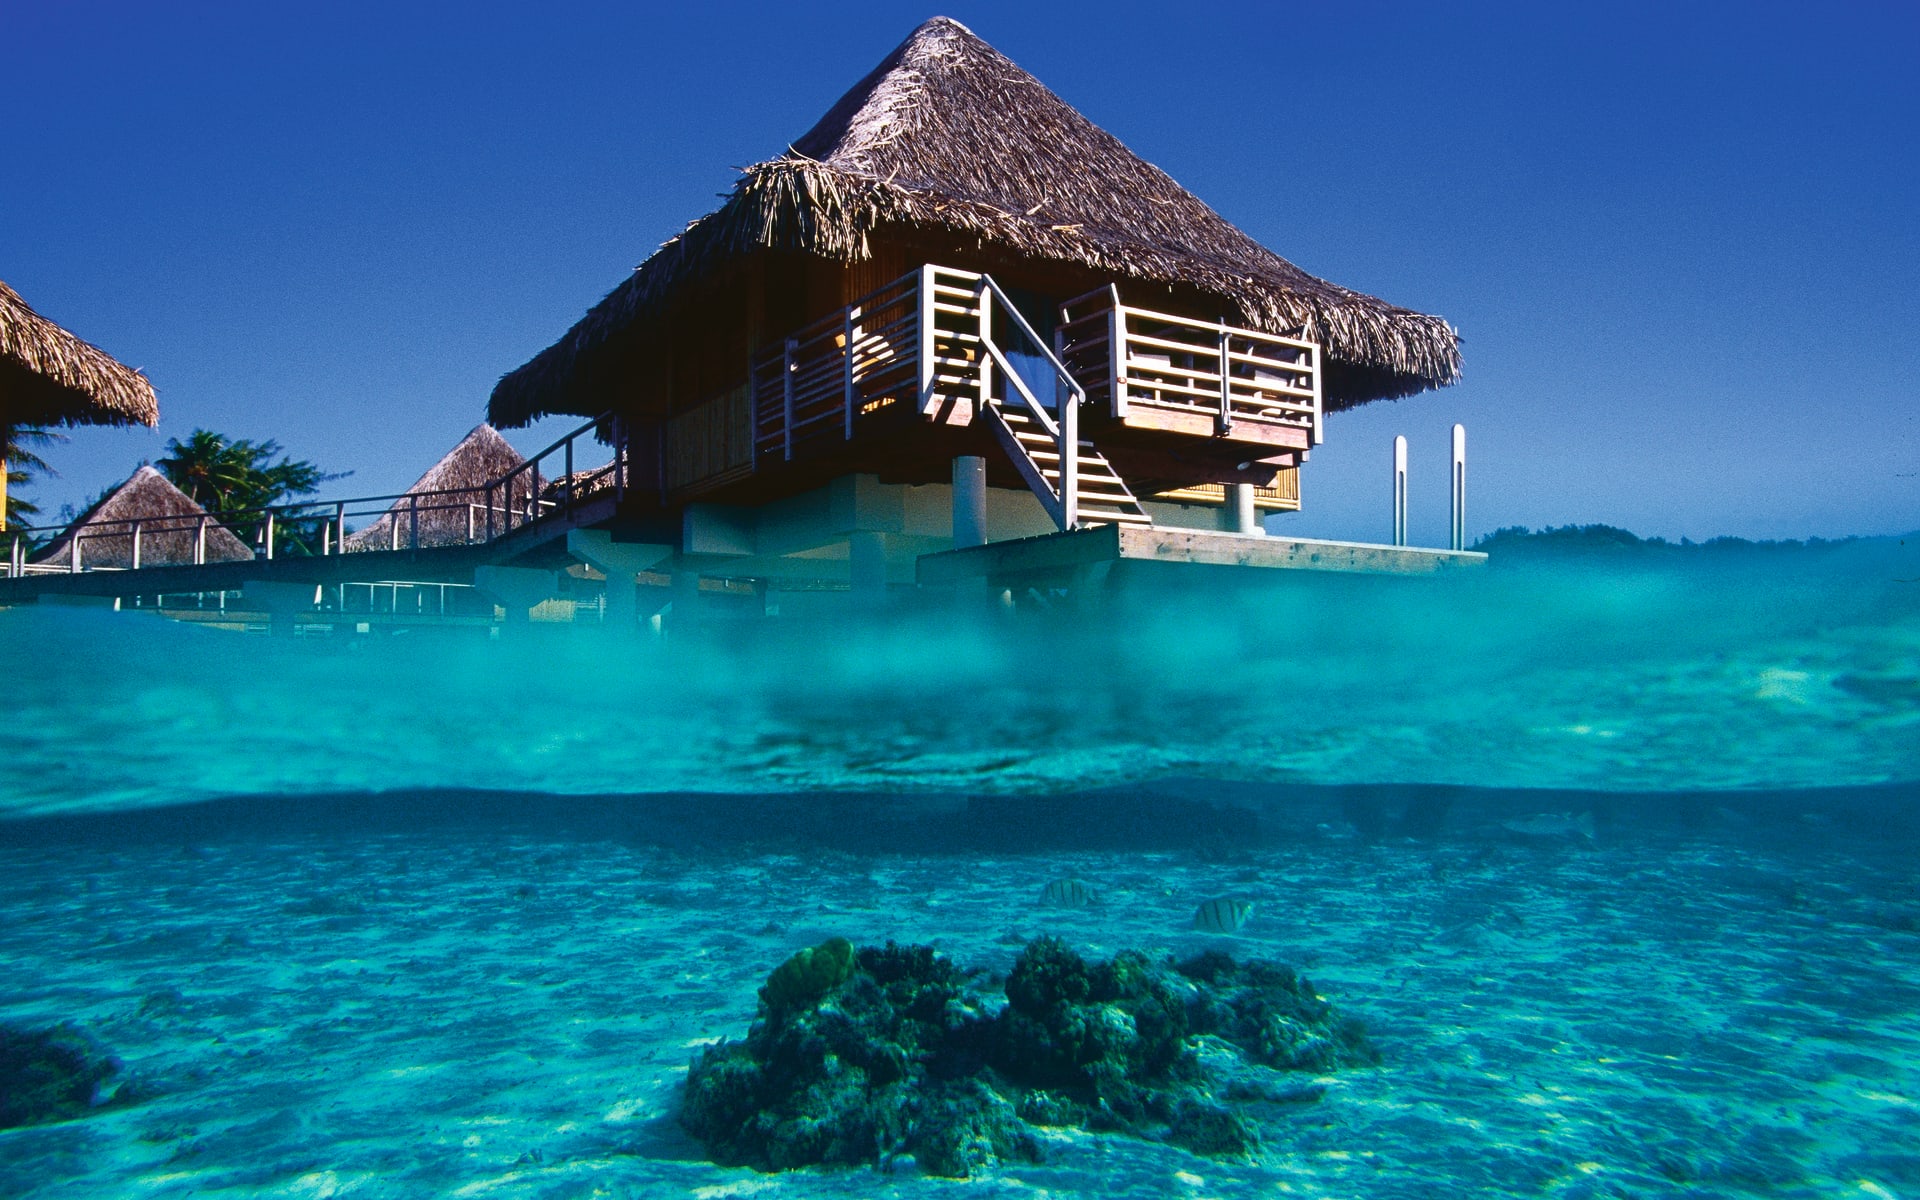 You can see underneath the ocean's surface as well as the top of a thatched-roof villas. 